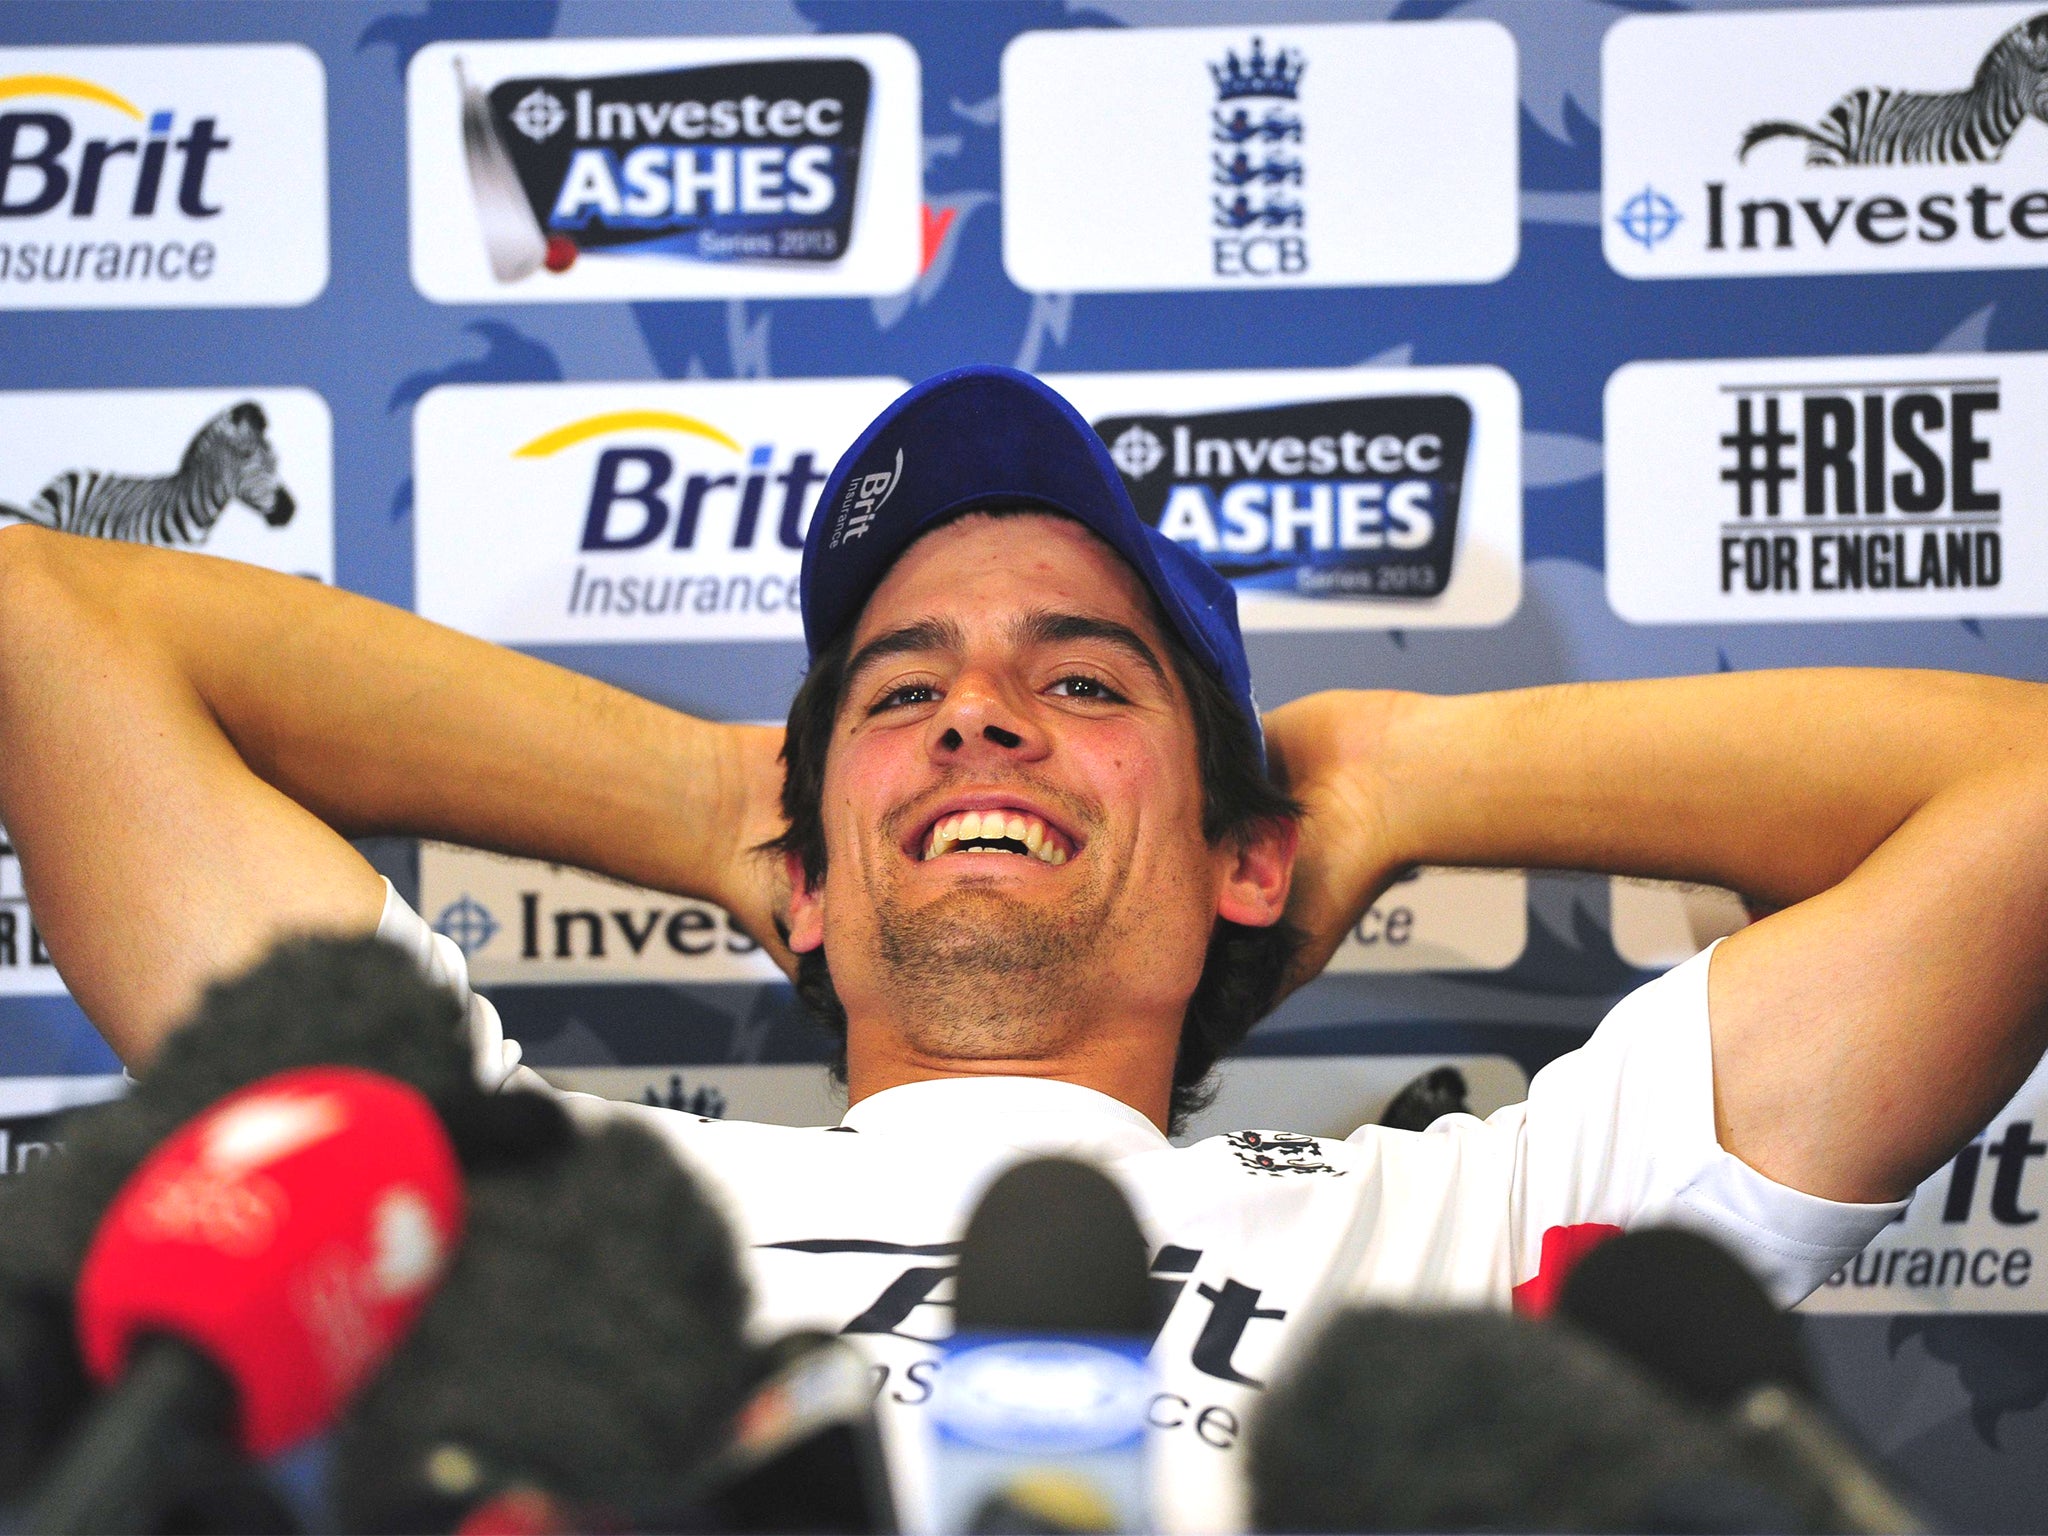 Alastair Cook was in a laid-back mood in Wednesday's press conference at Lord's